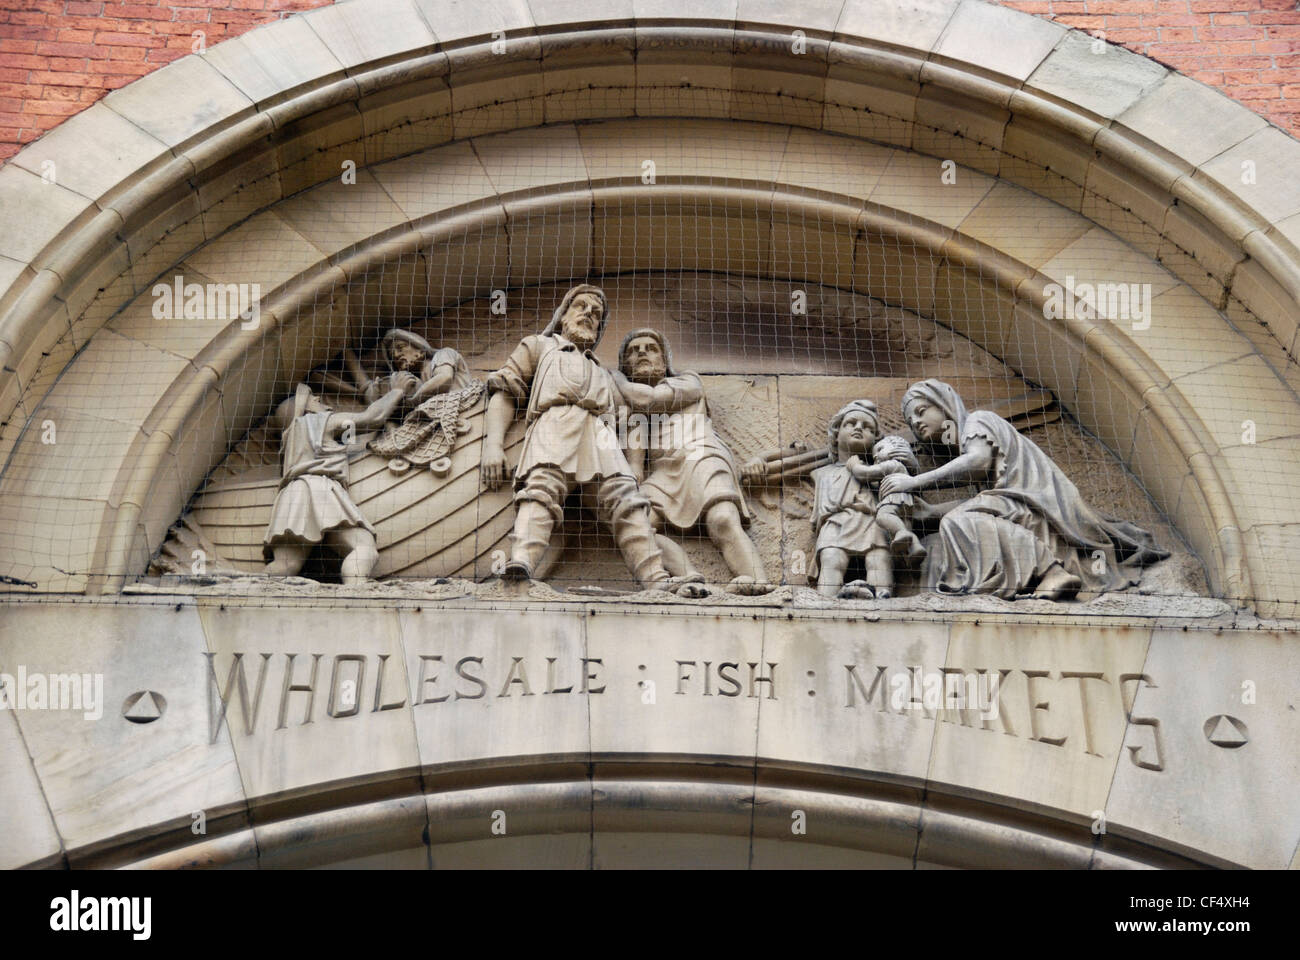 Sculptural relief of fishermen on the exterior of the former Manchester Wholesale Fish Markets. Stock Photo